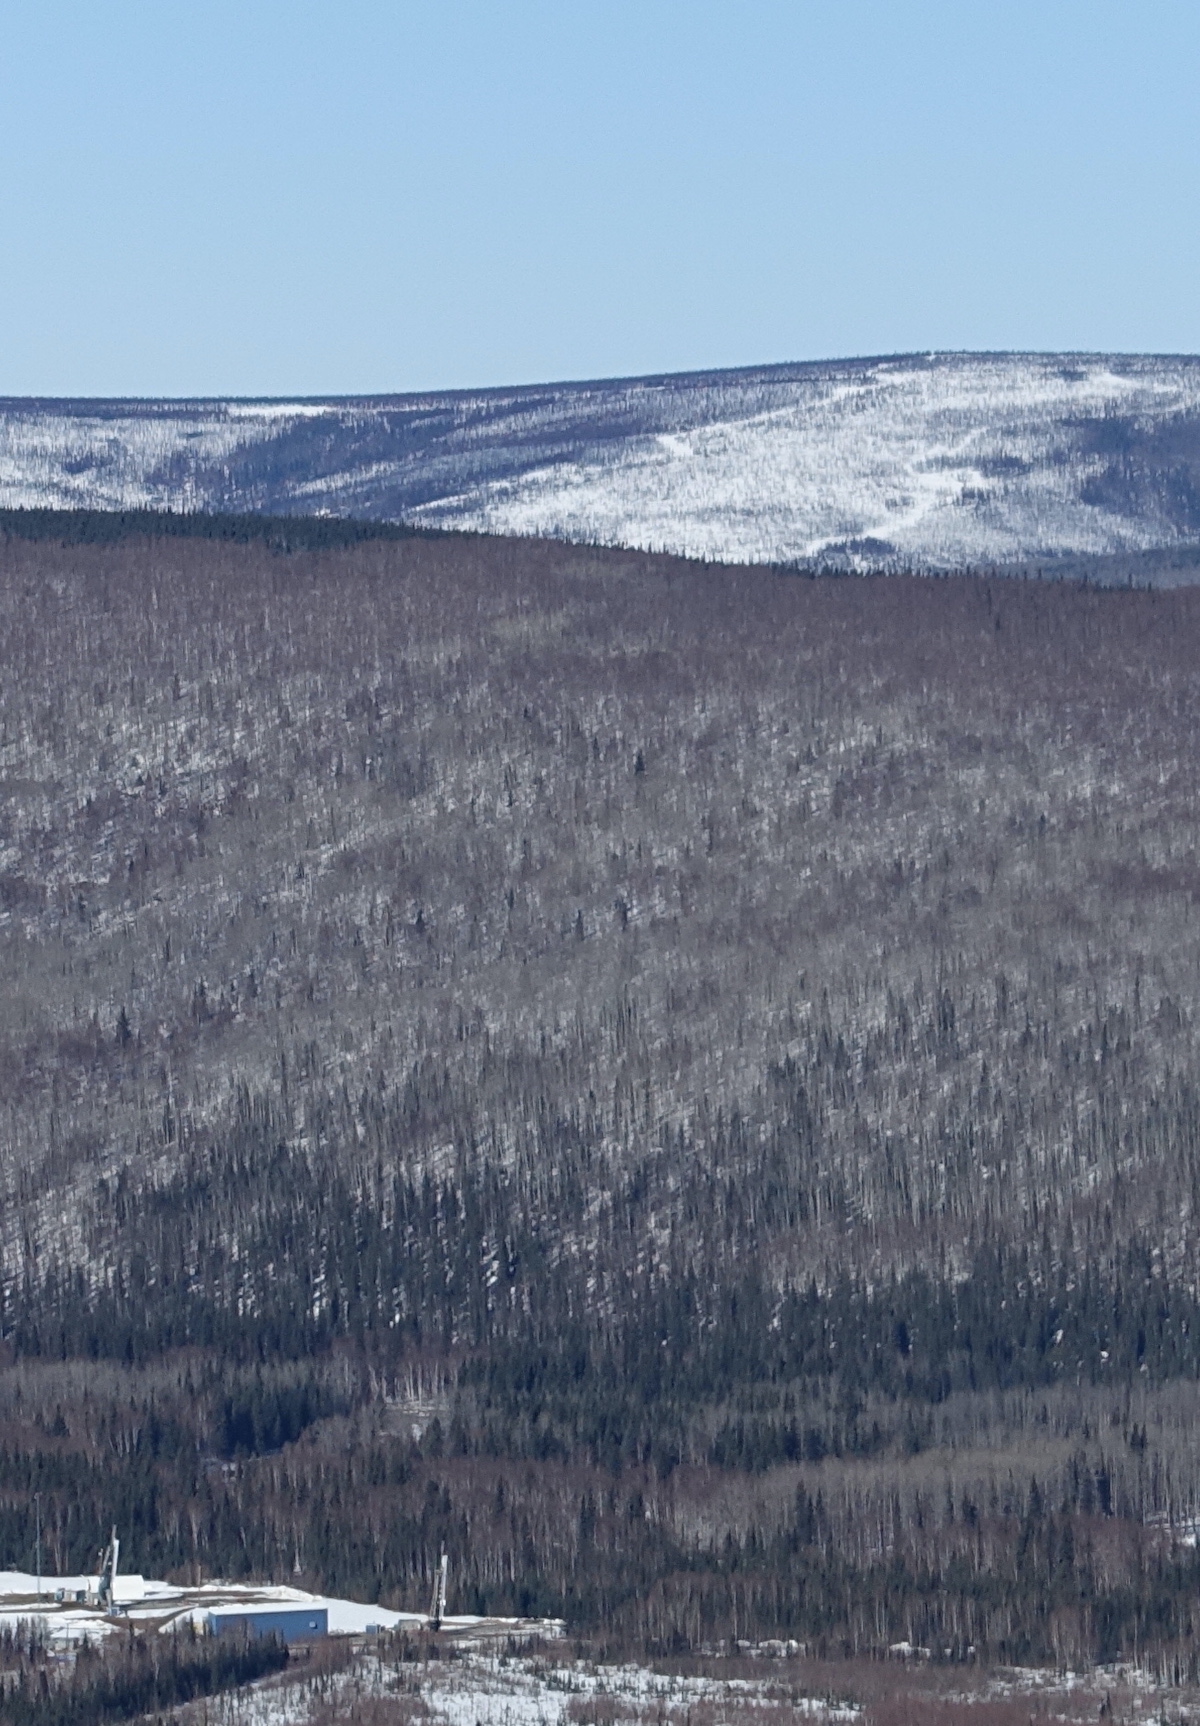 Two rockets sit upright in the bottom of a valley between tree-covered, snowy hills.